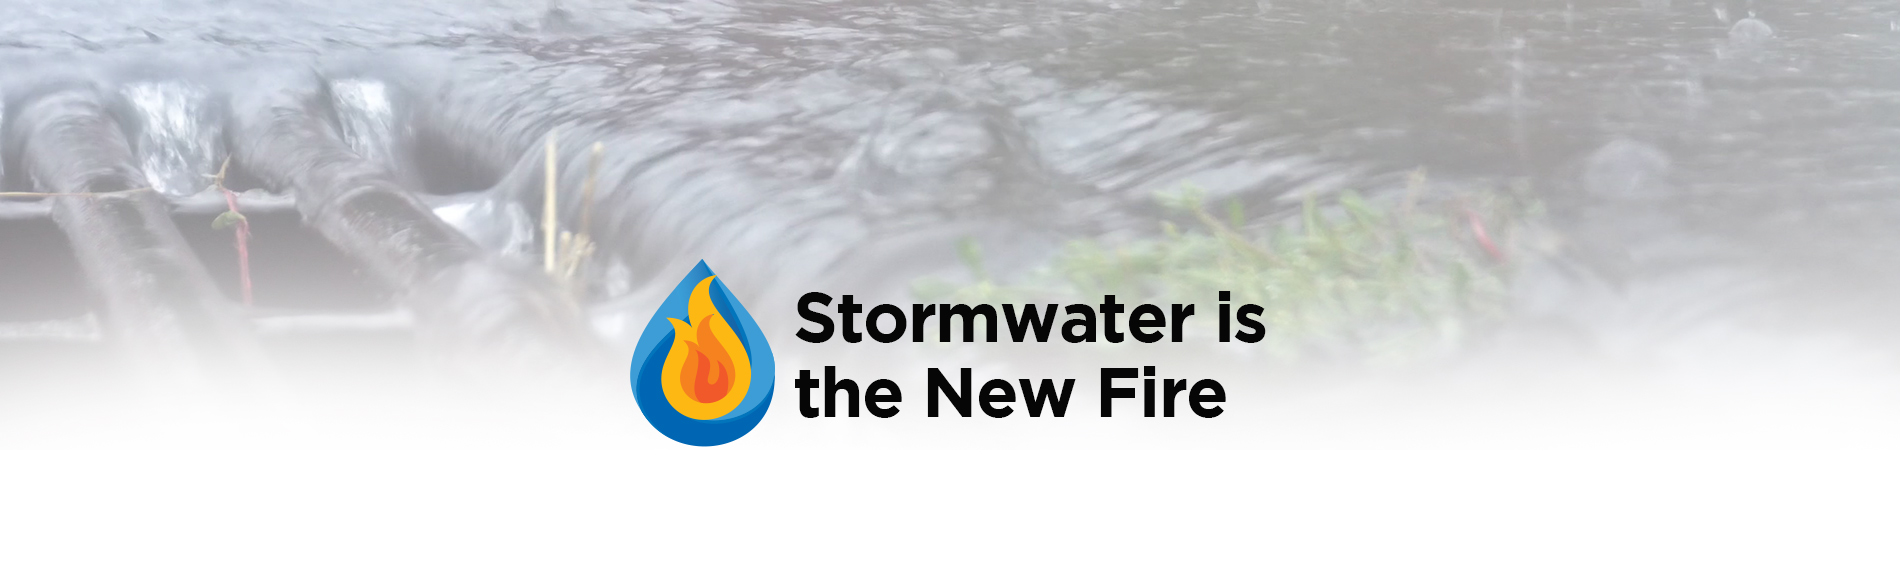 Stormwater is the new fire icon with water running over a sewer drain